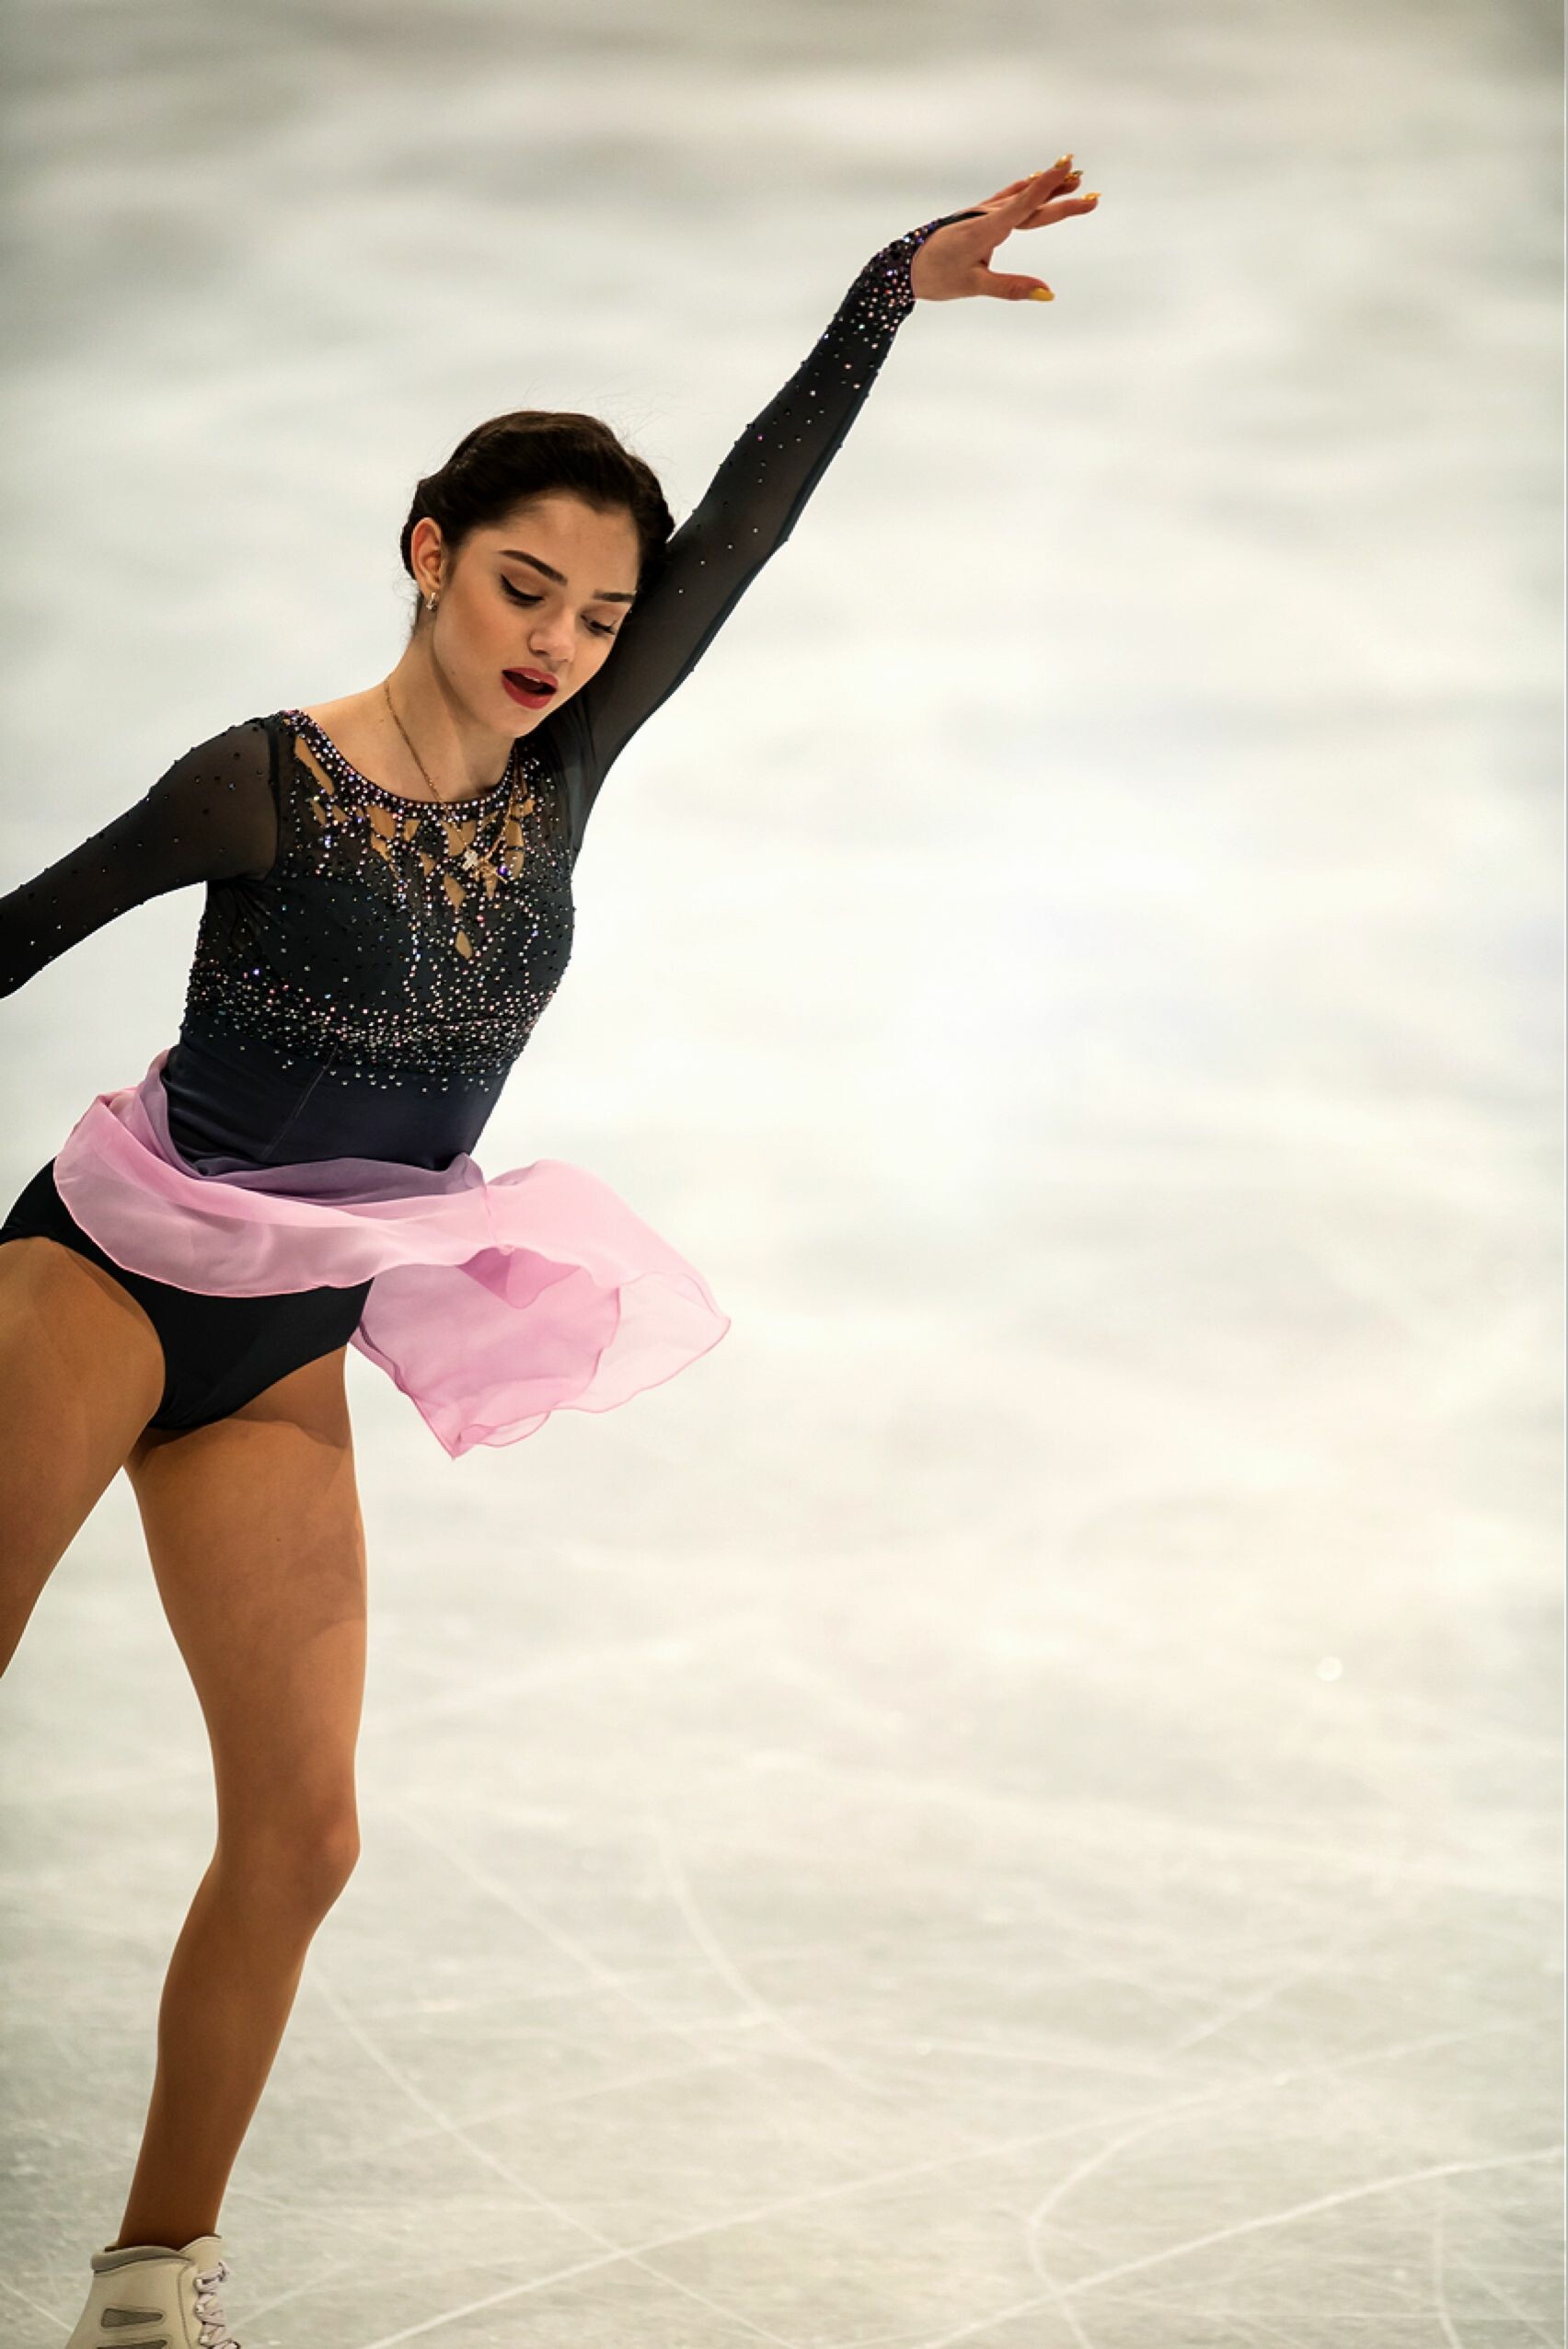 Evgenia Medvedeva: A two-time Russian national figure skating champion (2016, 2017). 1710x2560 HD Wallpaper.